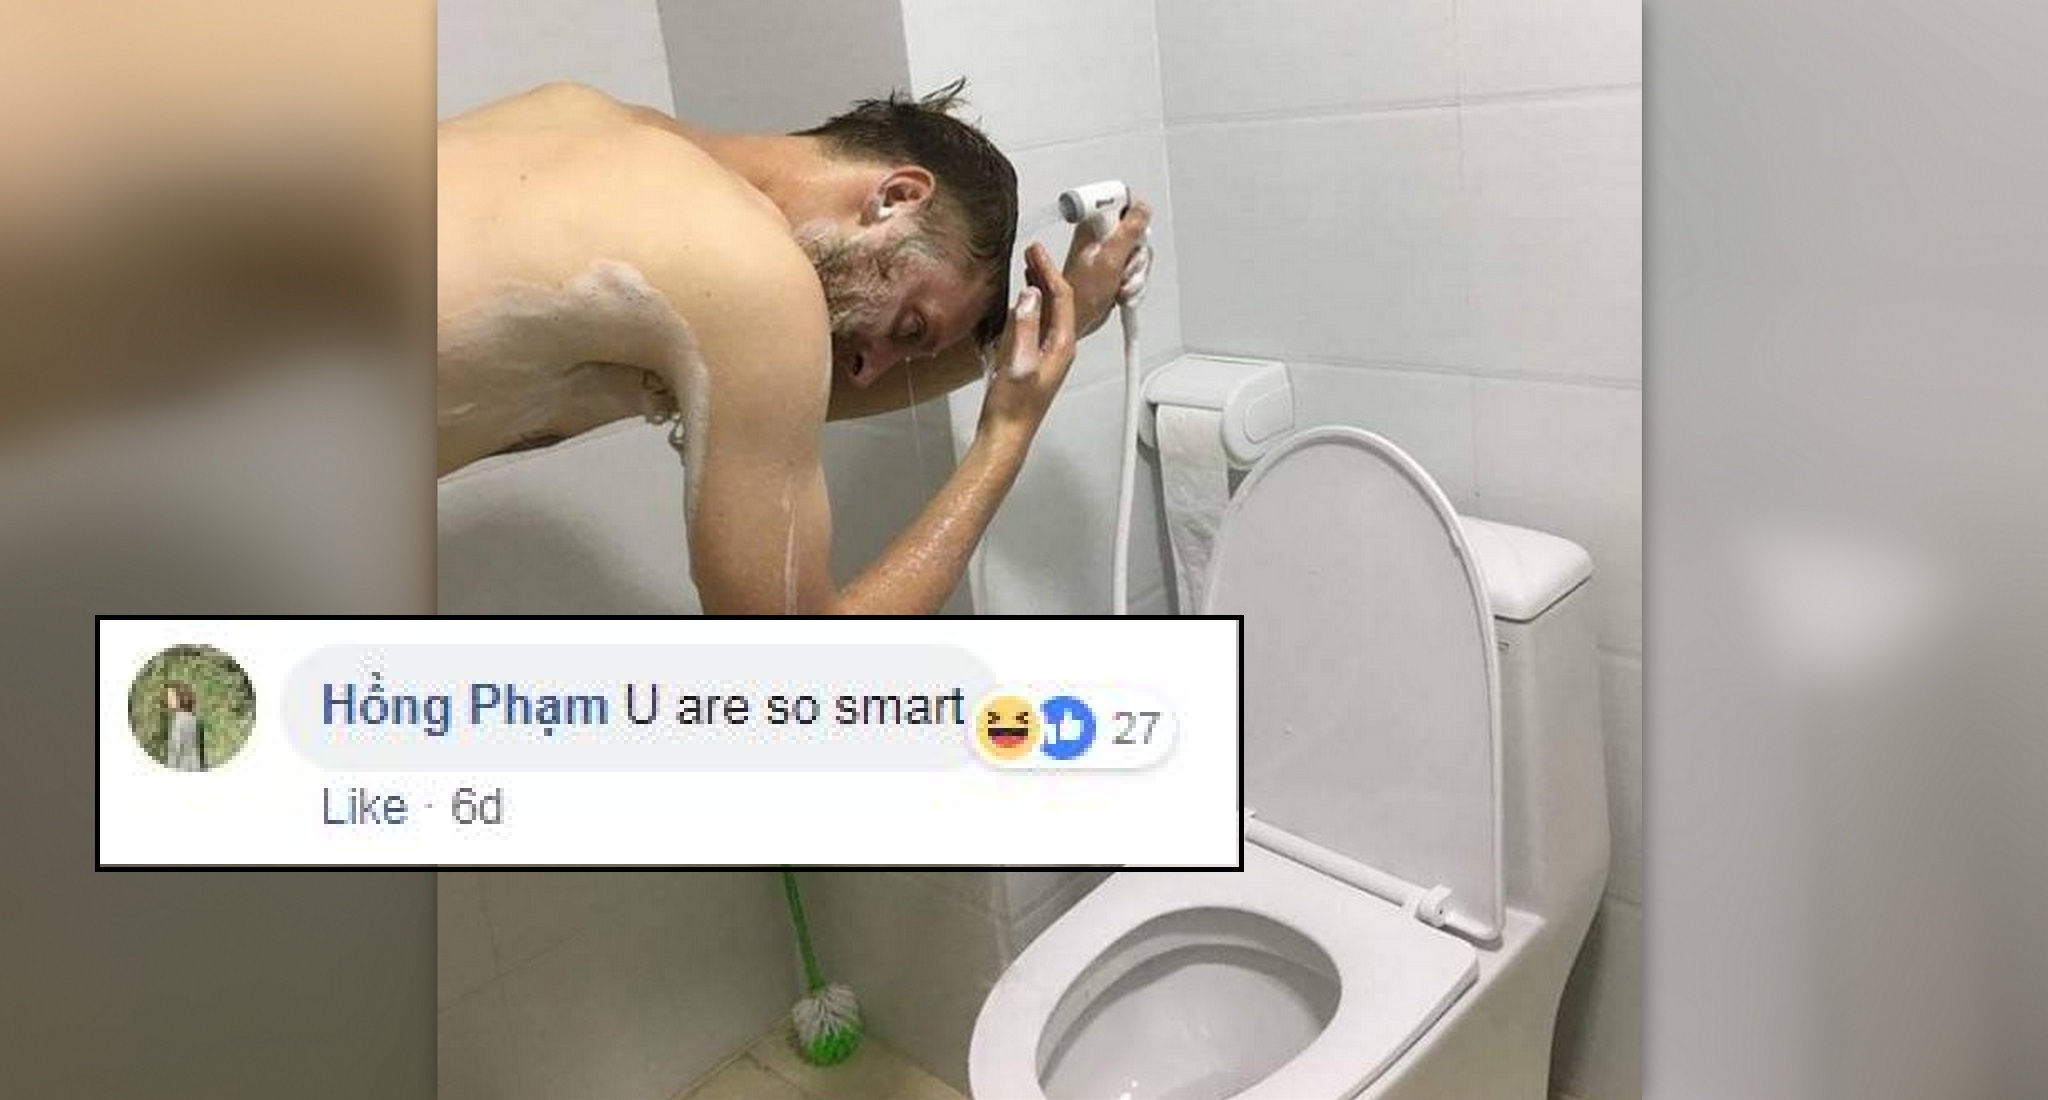 Tourist Confuses Jet Spray For Shower, Washes Hair While Complaining About It’s Position!